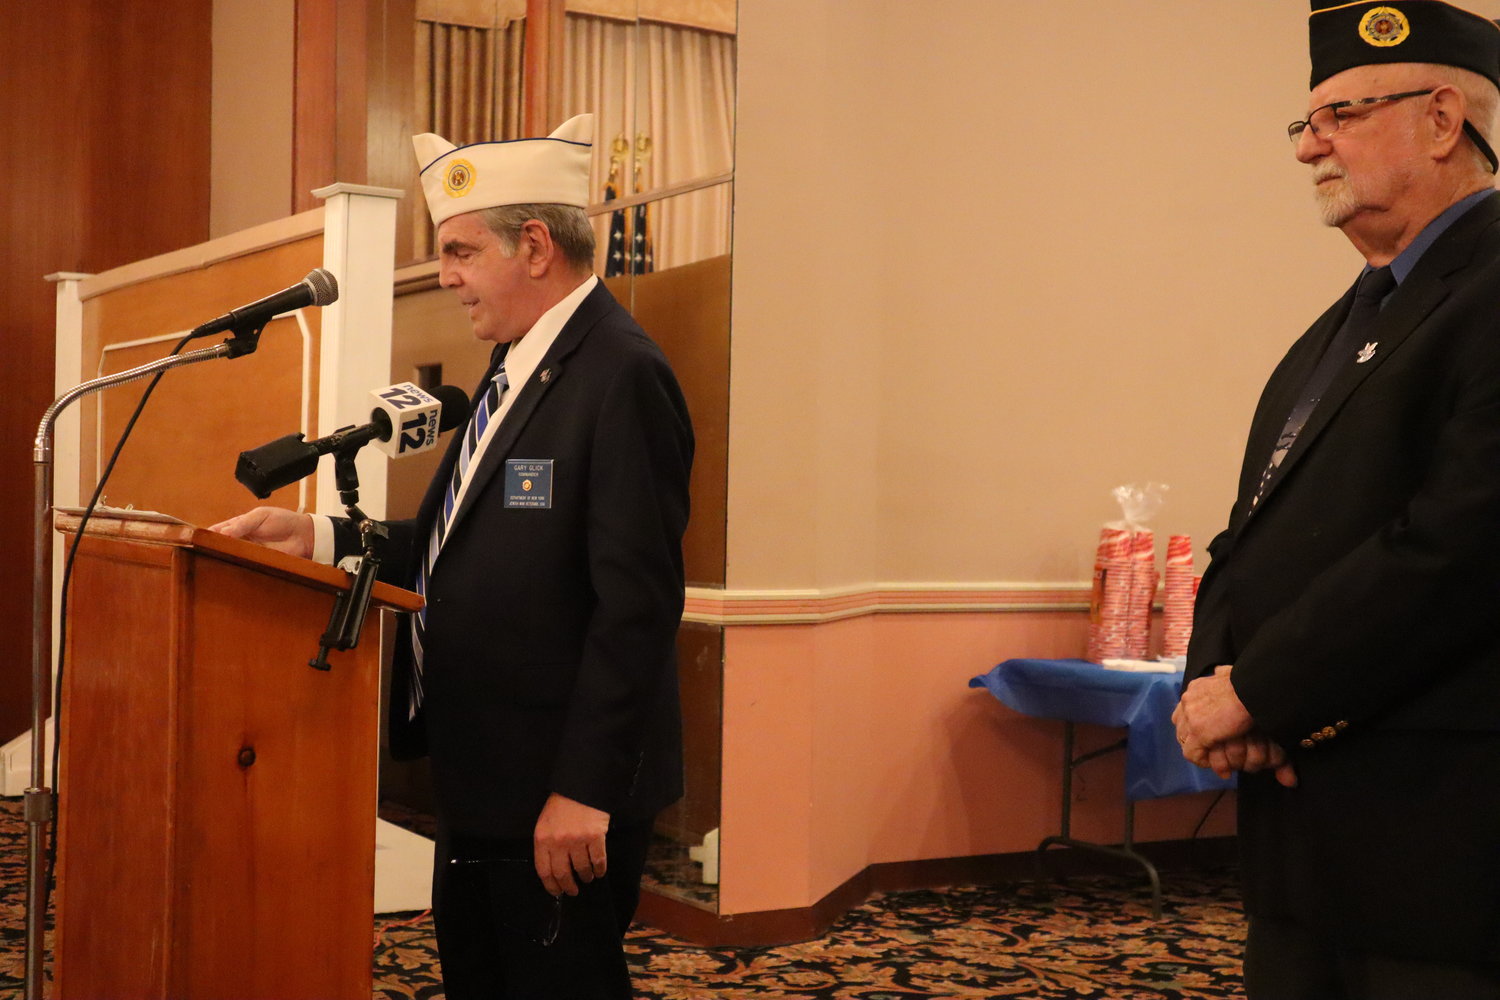 Gary Glick, commander of the Department of New York Jewish War Veterans, delivers his message about the organization’s 127-year history combating hate regarding Jews in the military. He also spoke about the uncertainty of the group’s future in the face of rising antisemitism.